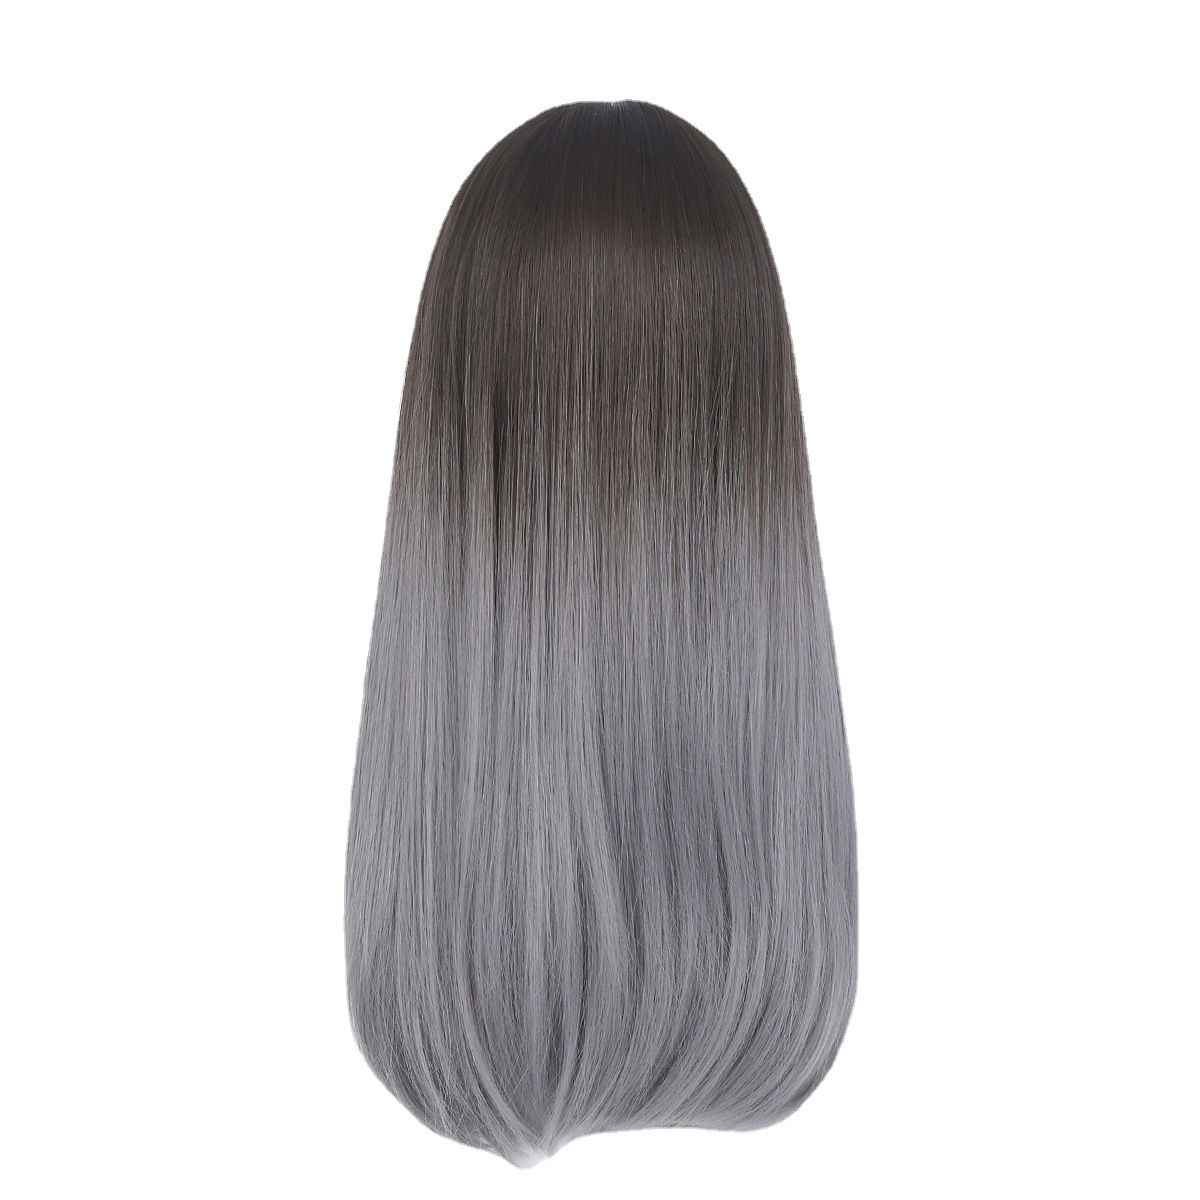 Hot selling princess cut bangs full headdress long straight hair Hime cut synthetic wig multi color optional, daily, cosplay